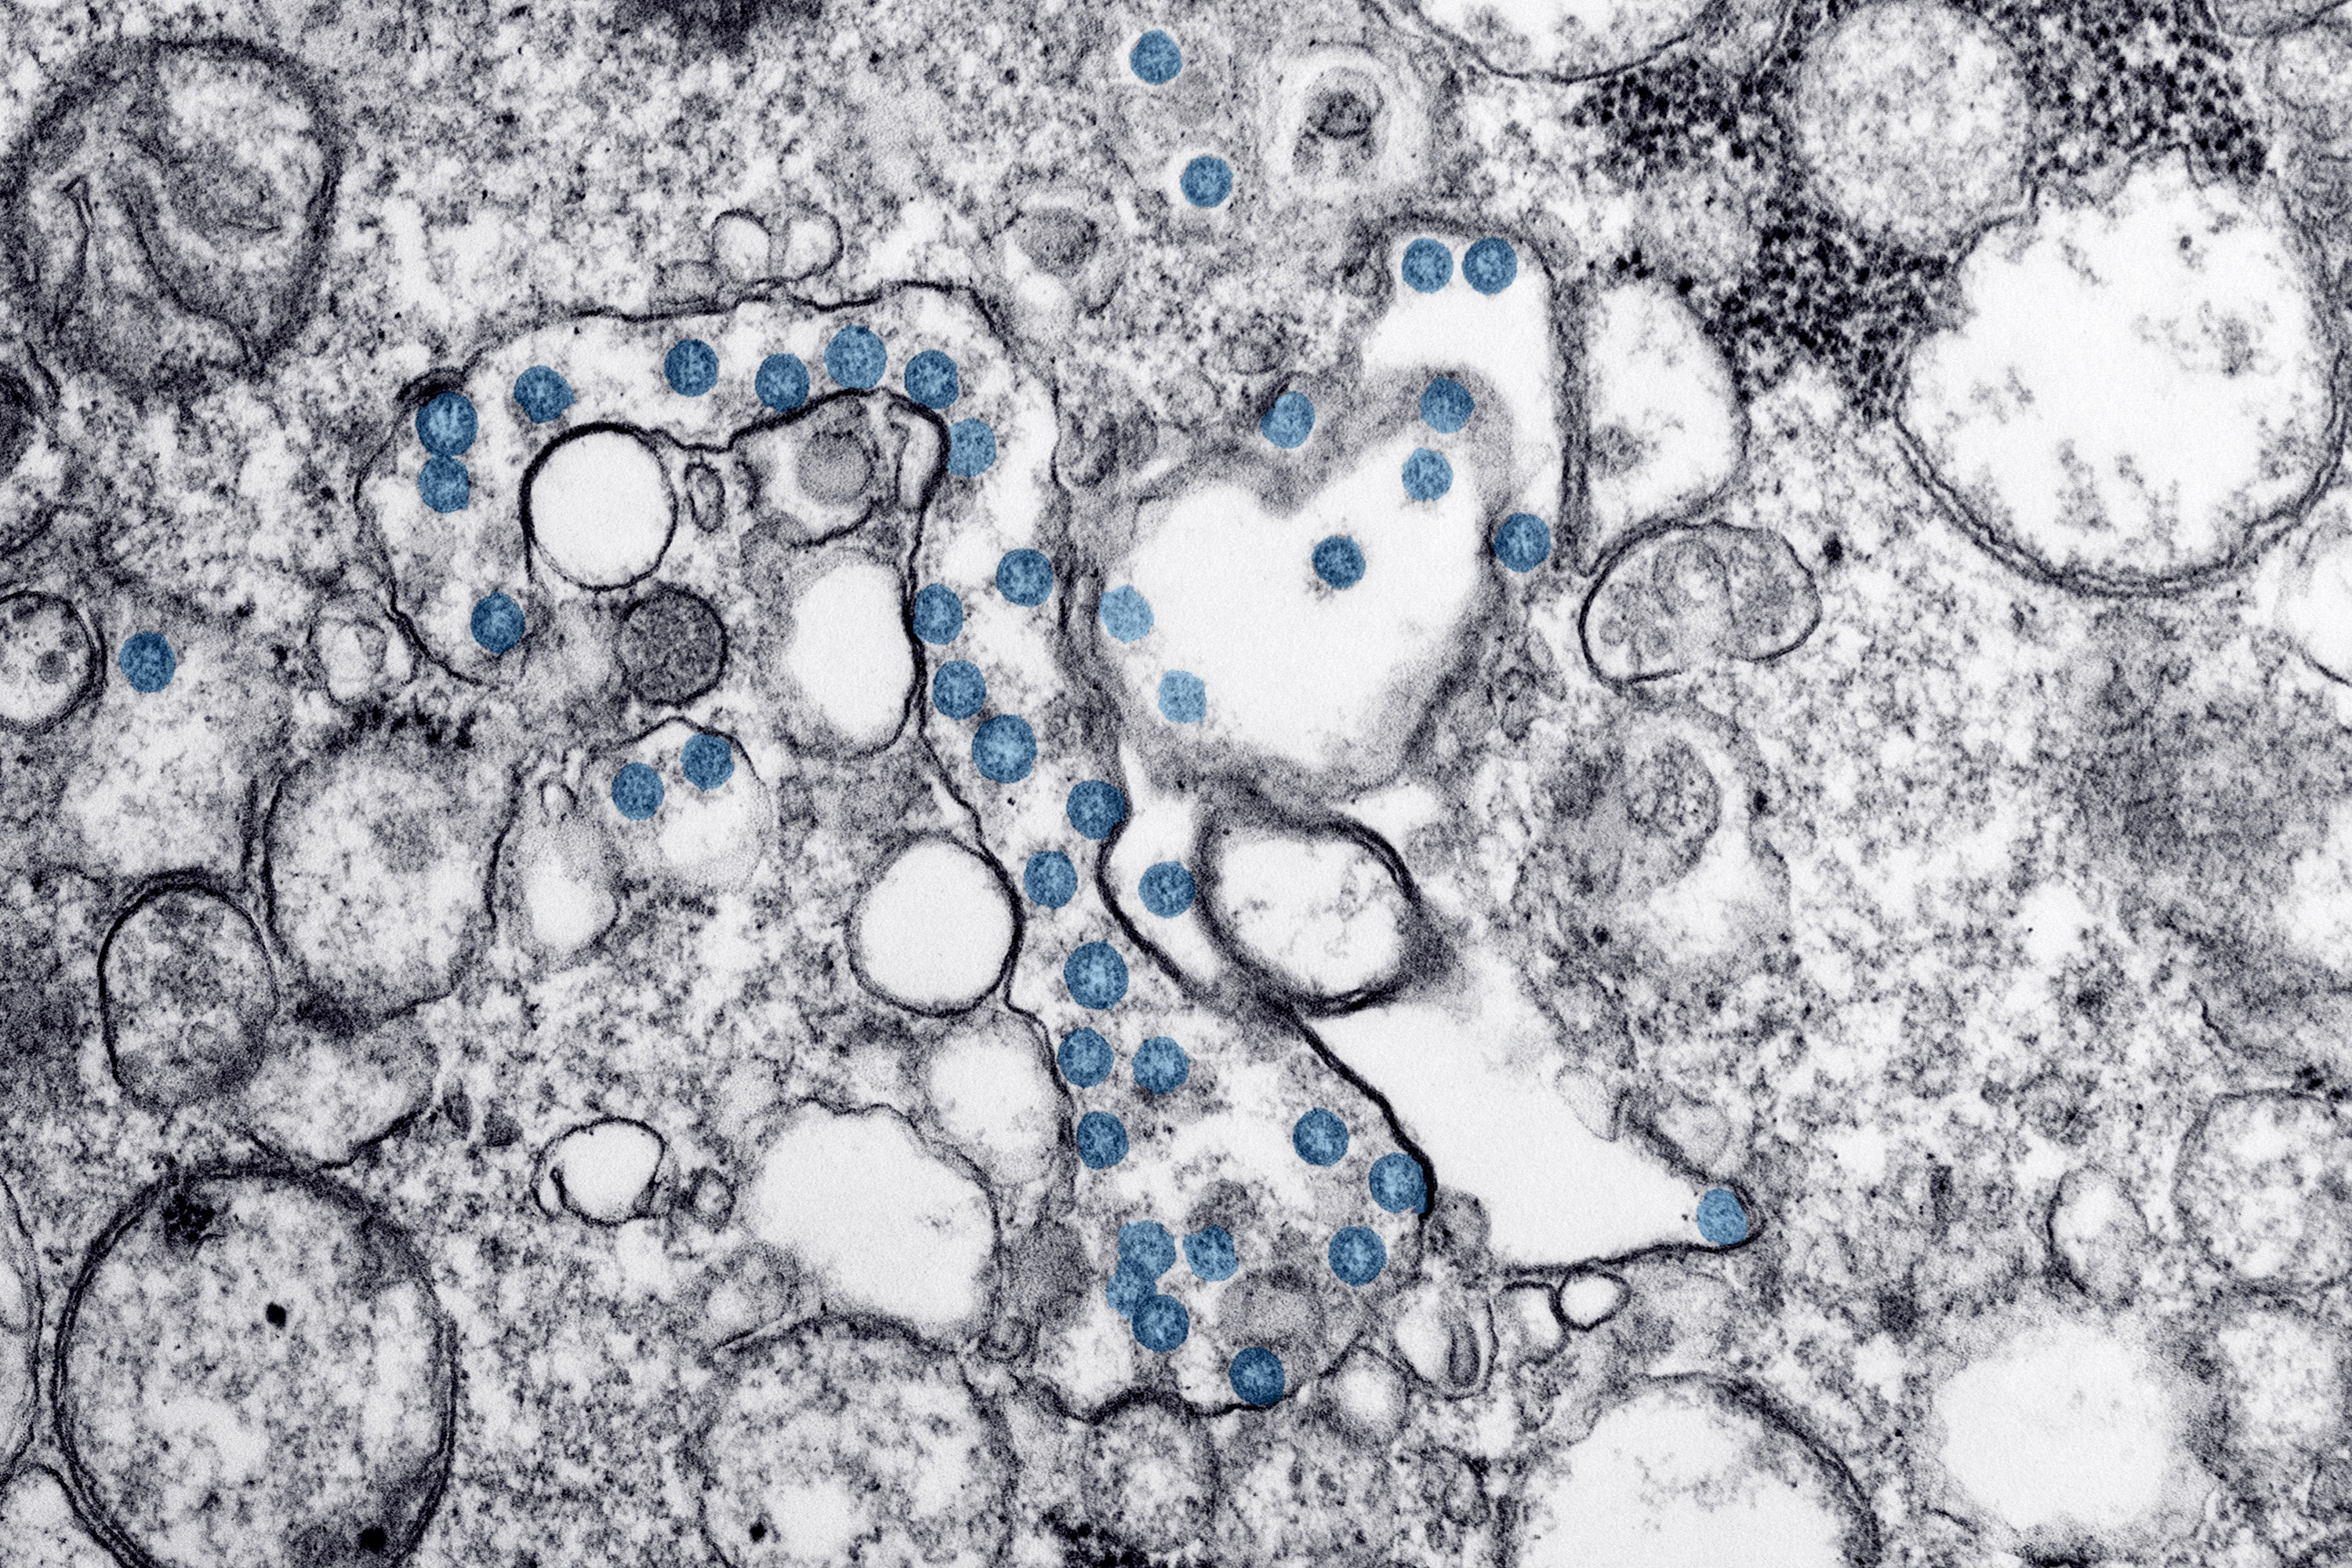 Transmission electron microscope image from the first U.S. case of COVID-19. The spherical viral particles, colorized blue, contain cross-sections through the viral genome, seen as black dots. (Credit: Centers for Disease Control and Prevention: Hannah A. Bullock and Azaibi Tamin)